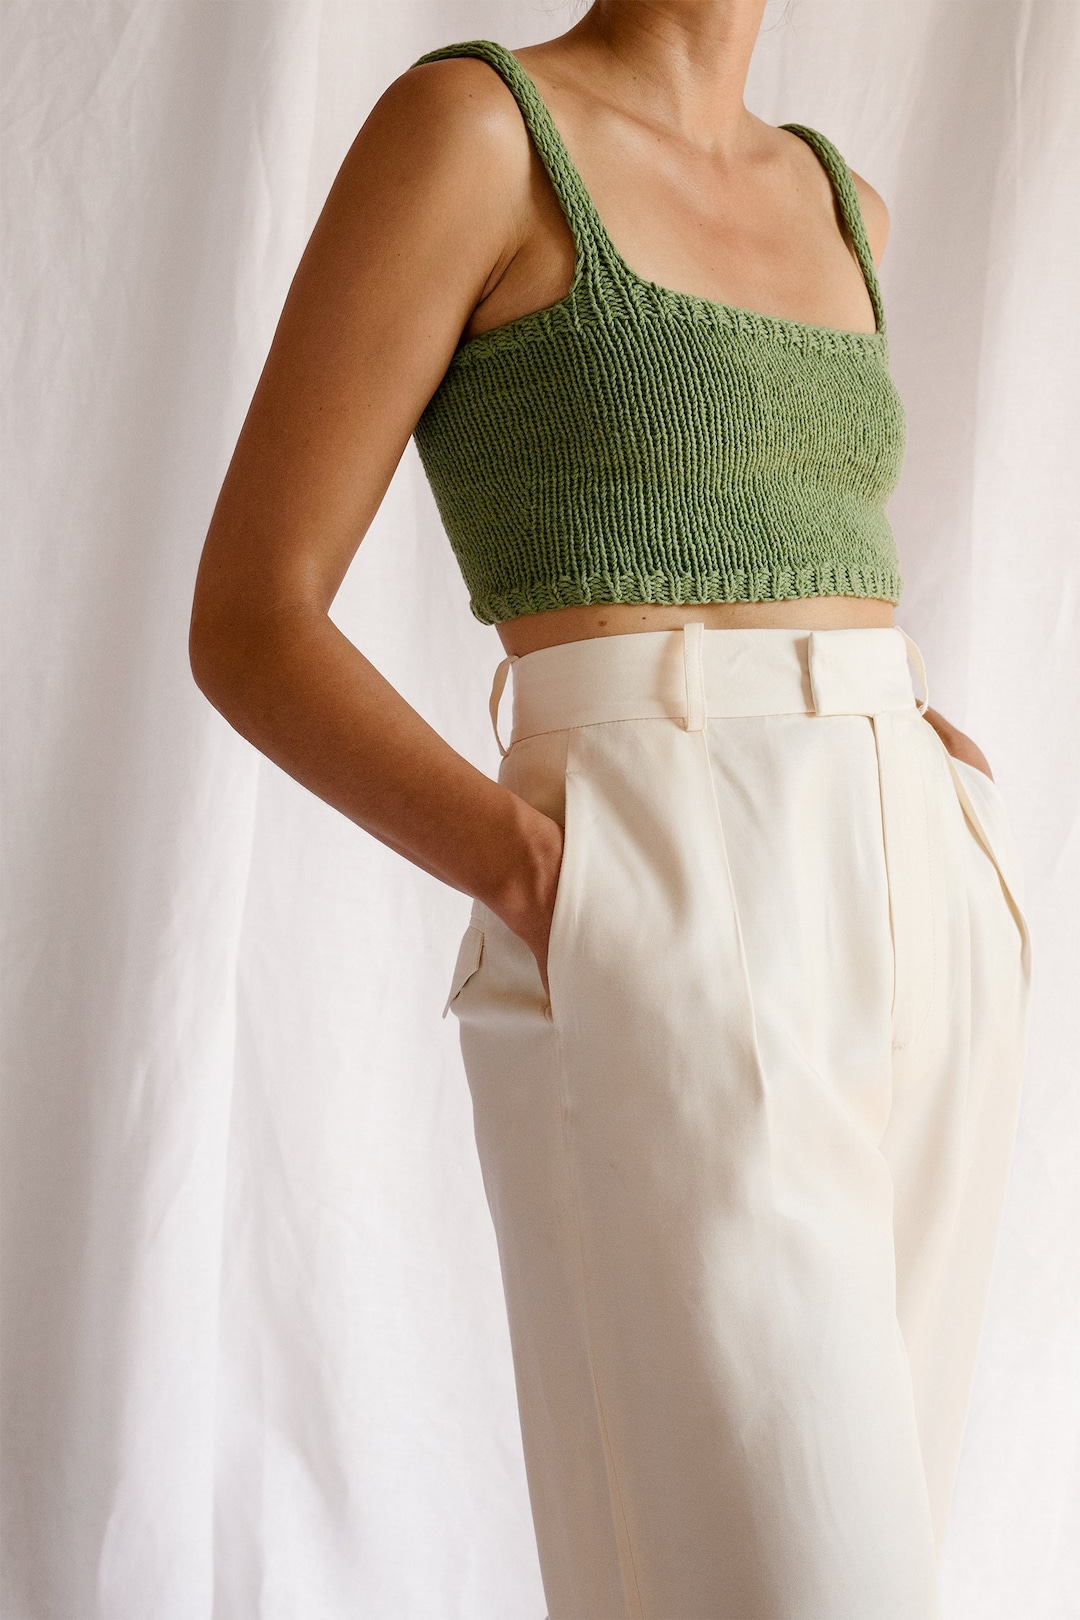 Square Neck Crop Top, Minimal Knit Top, Cropped Yoga Top, Hand Knit, Square  Neckline, Knit Bra, Fitted Cotton Bralette in Olive Green -  Canada